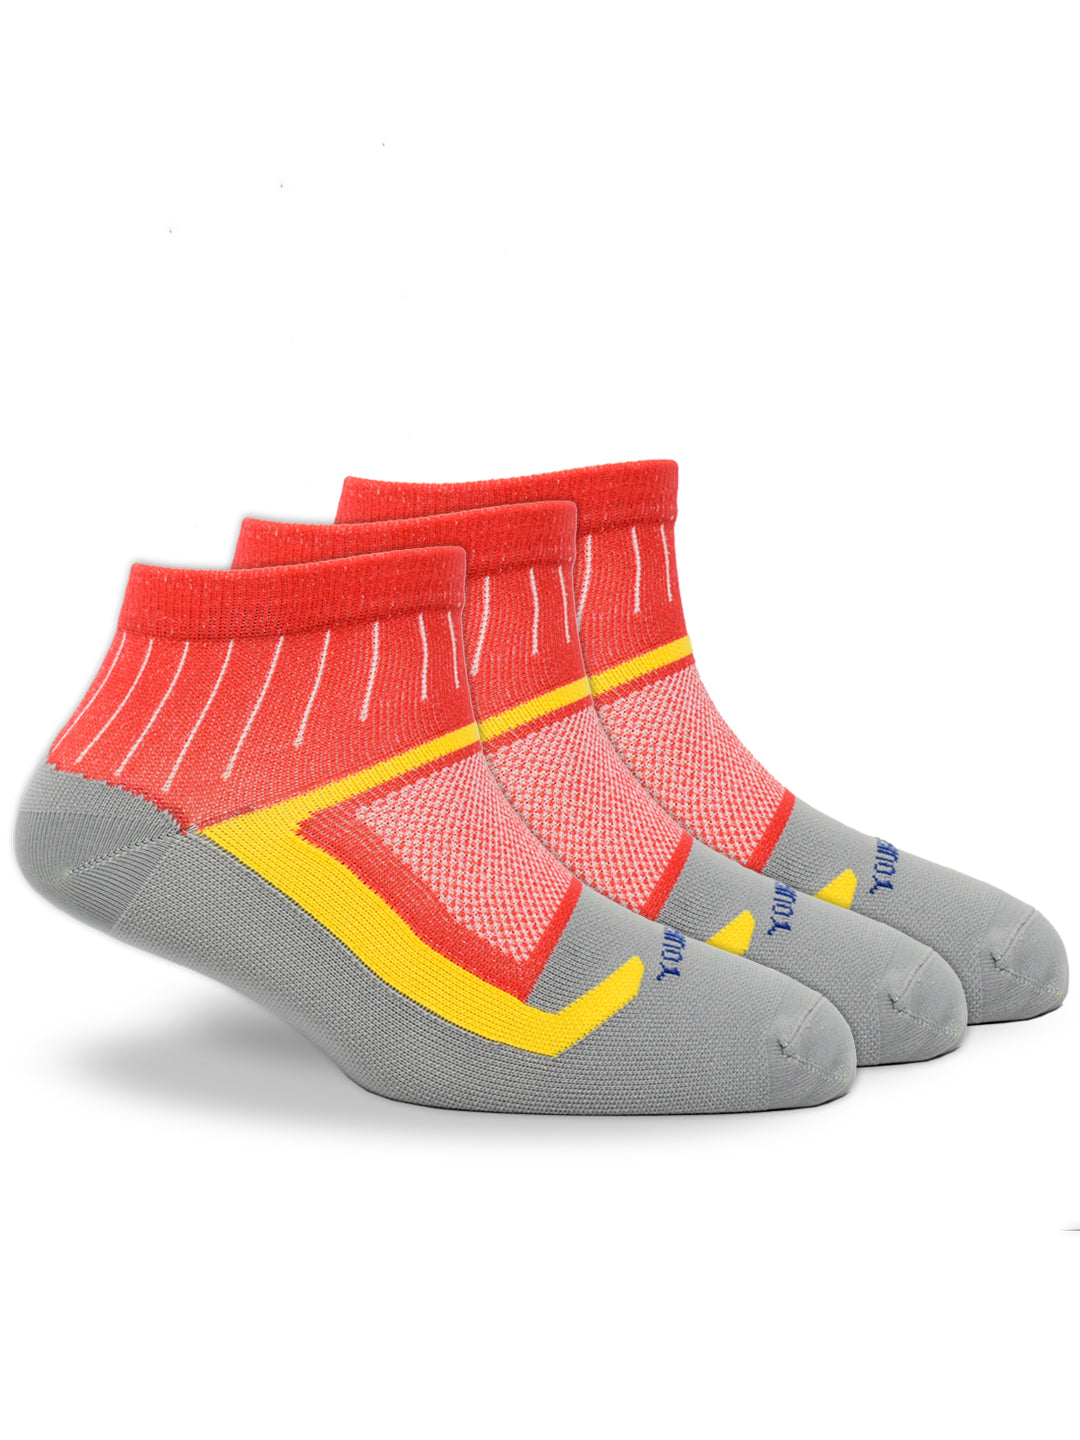 Young Wings Anti-Bacterial Dri-Fit Ankle Length Running Socks - Pack of 3 Pairs, Colour: Red/Grey